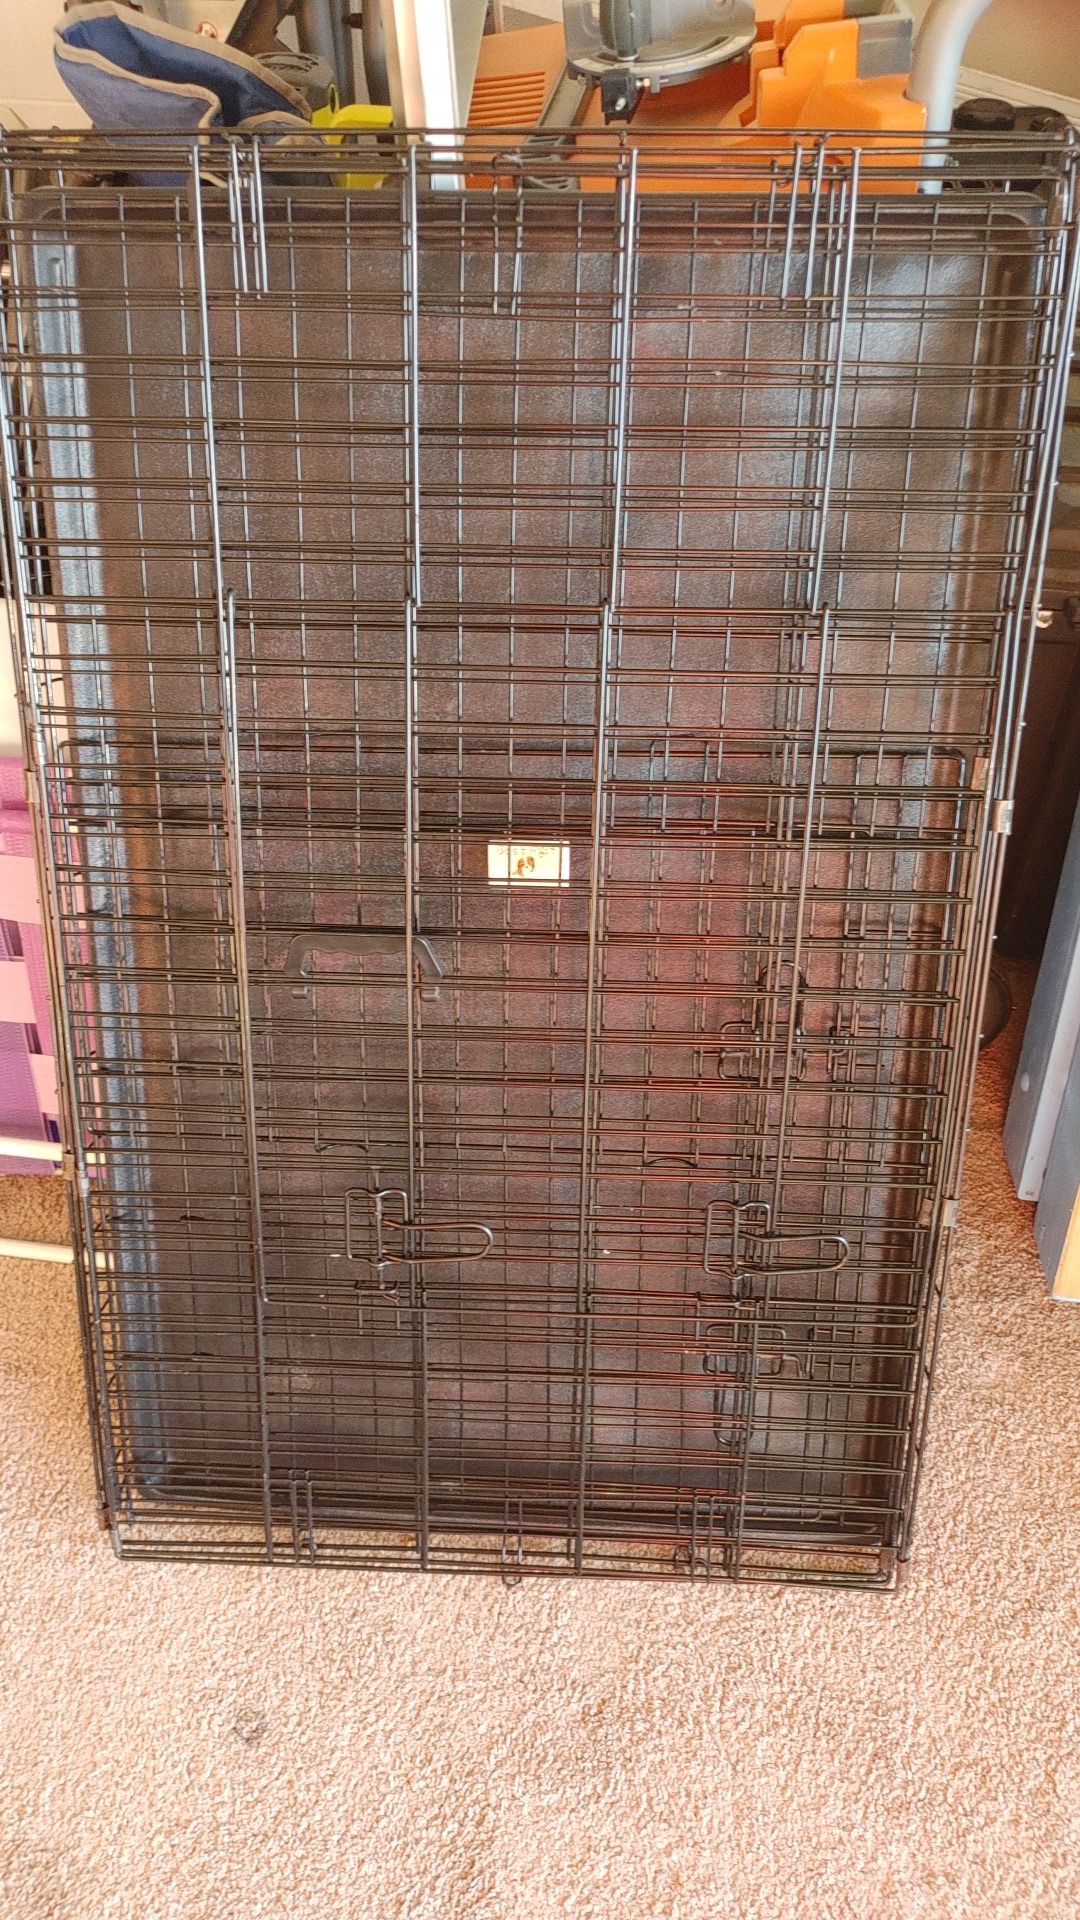 Large dog crate in great shape